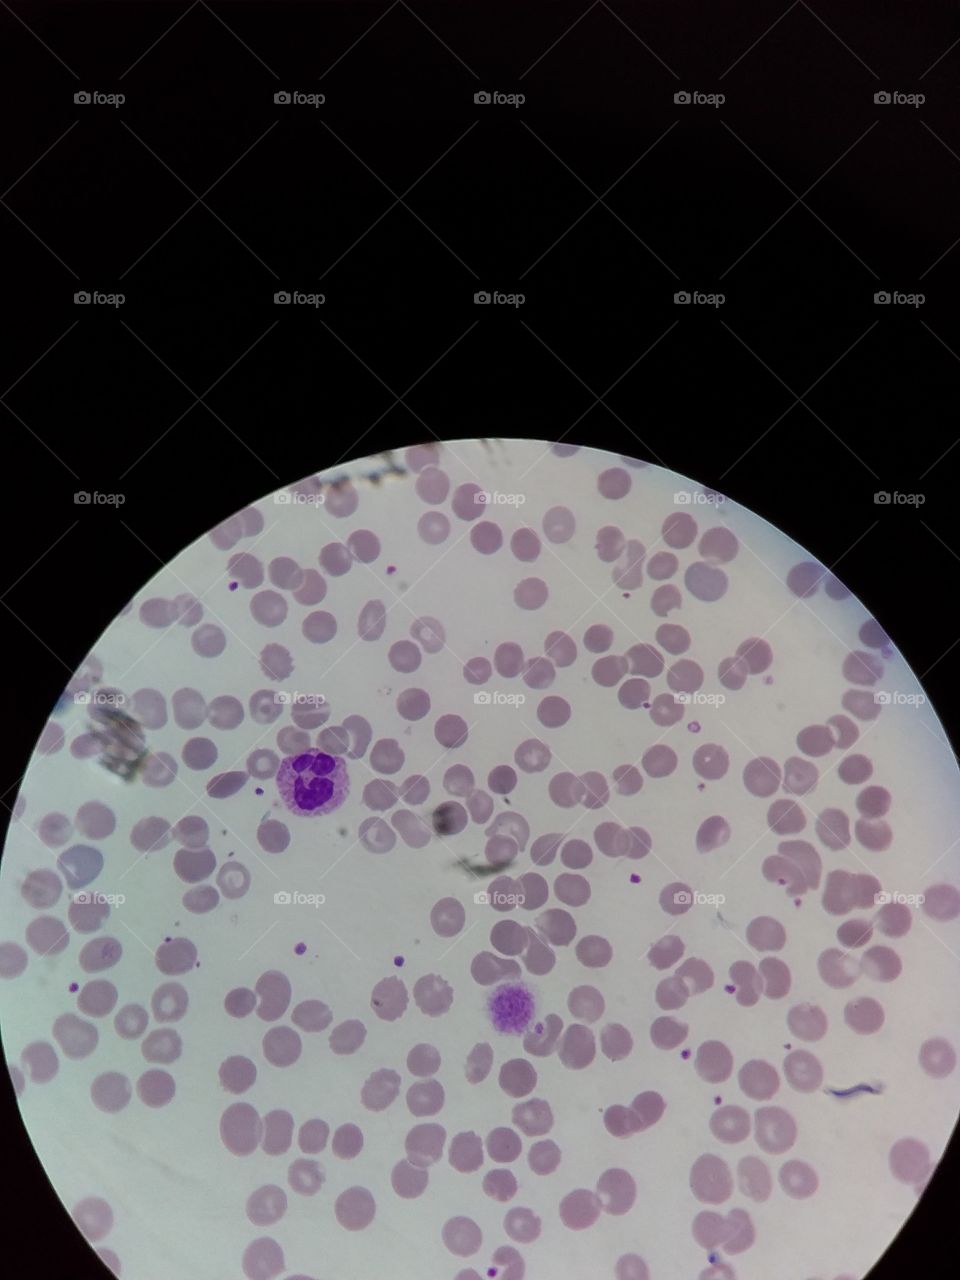 platelets/cell blood